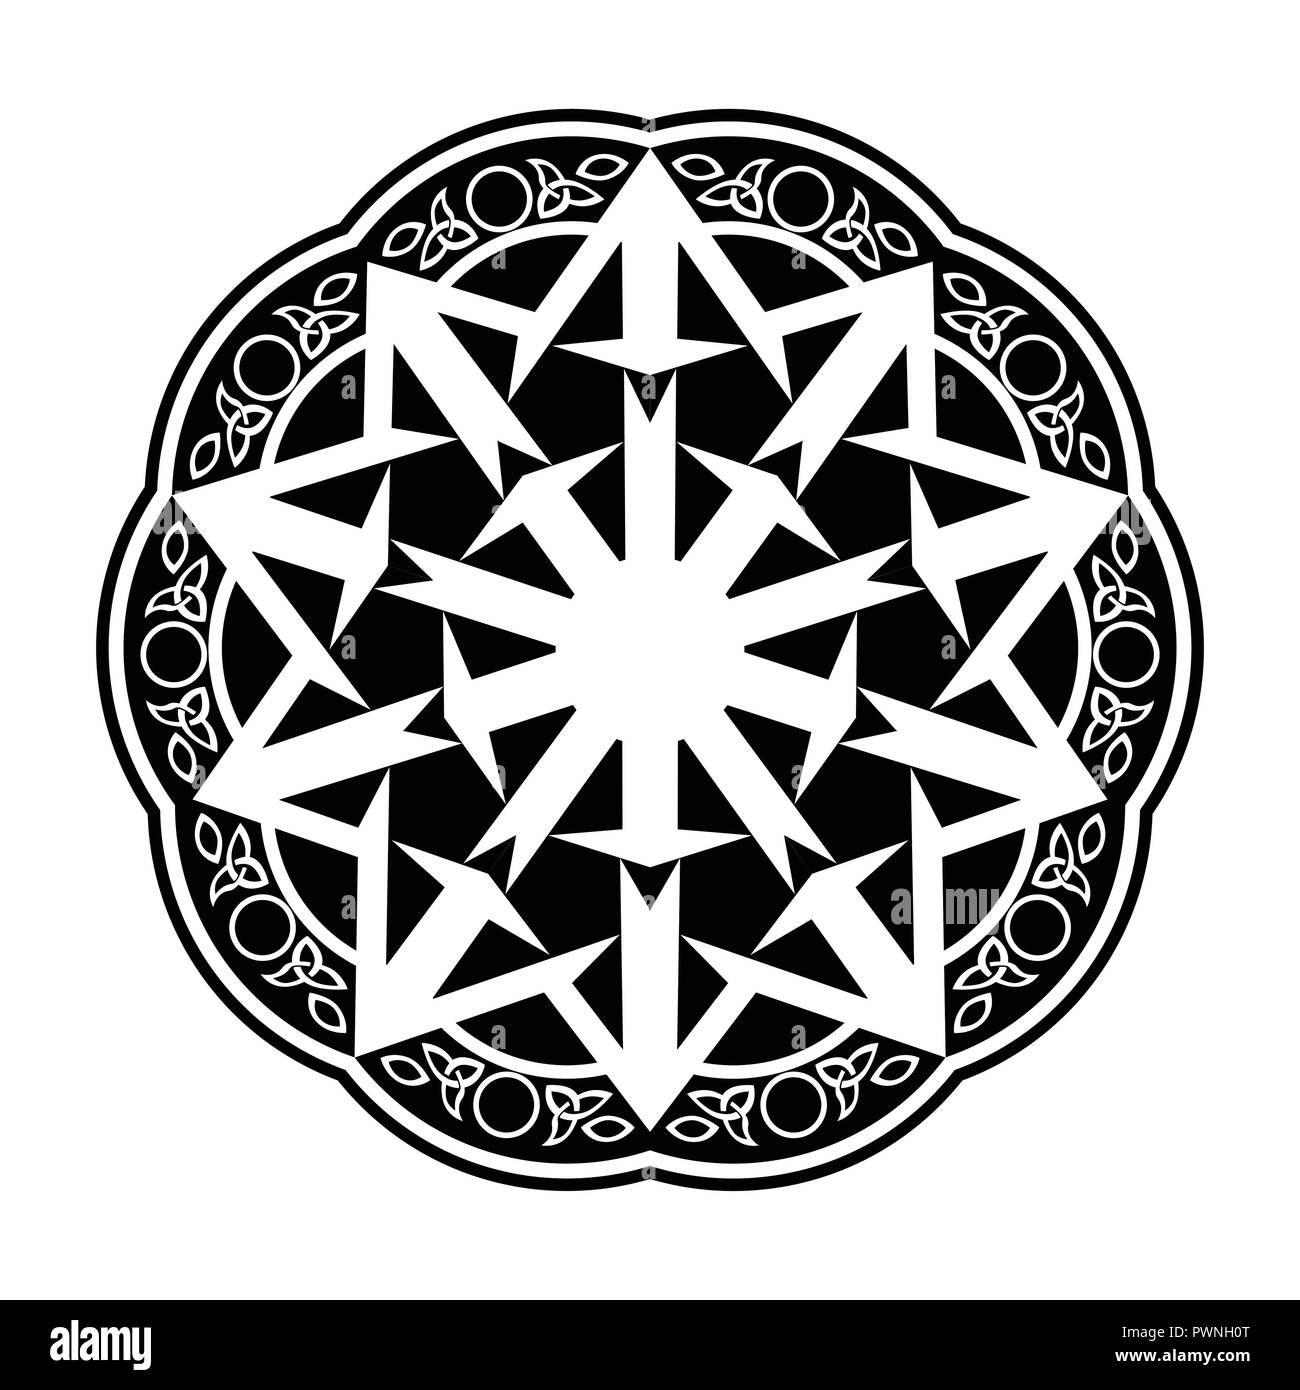 Black Wiccan Circular Ornament, Vector Illustration on white Stock Vector